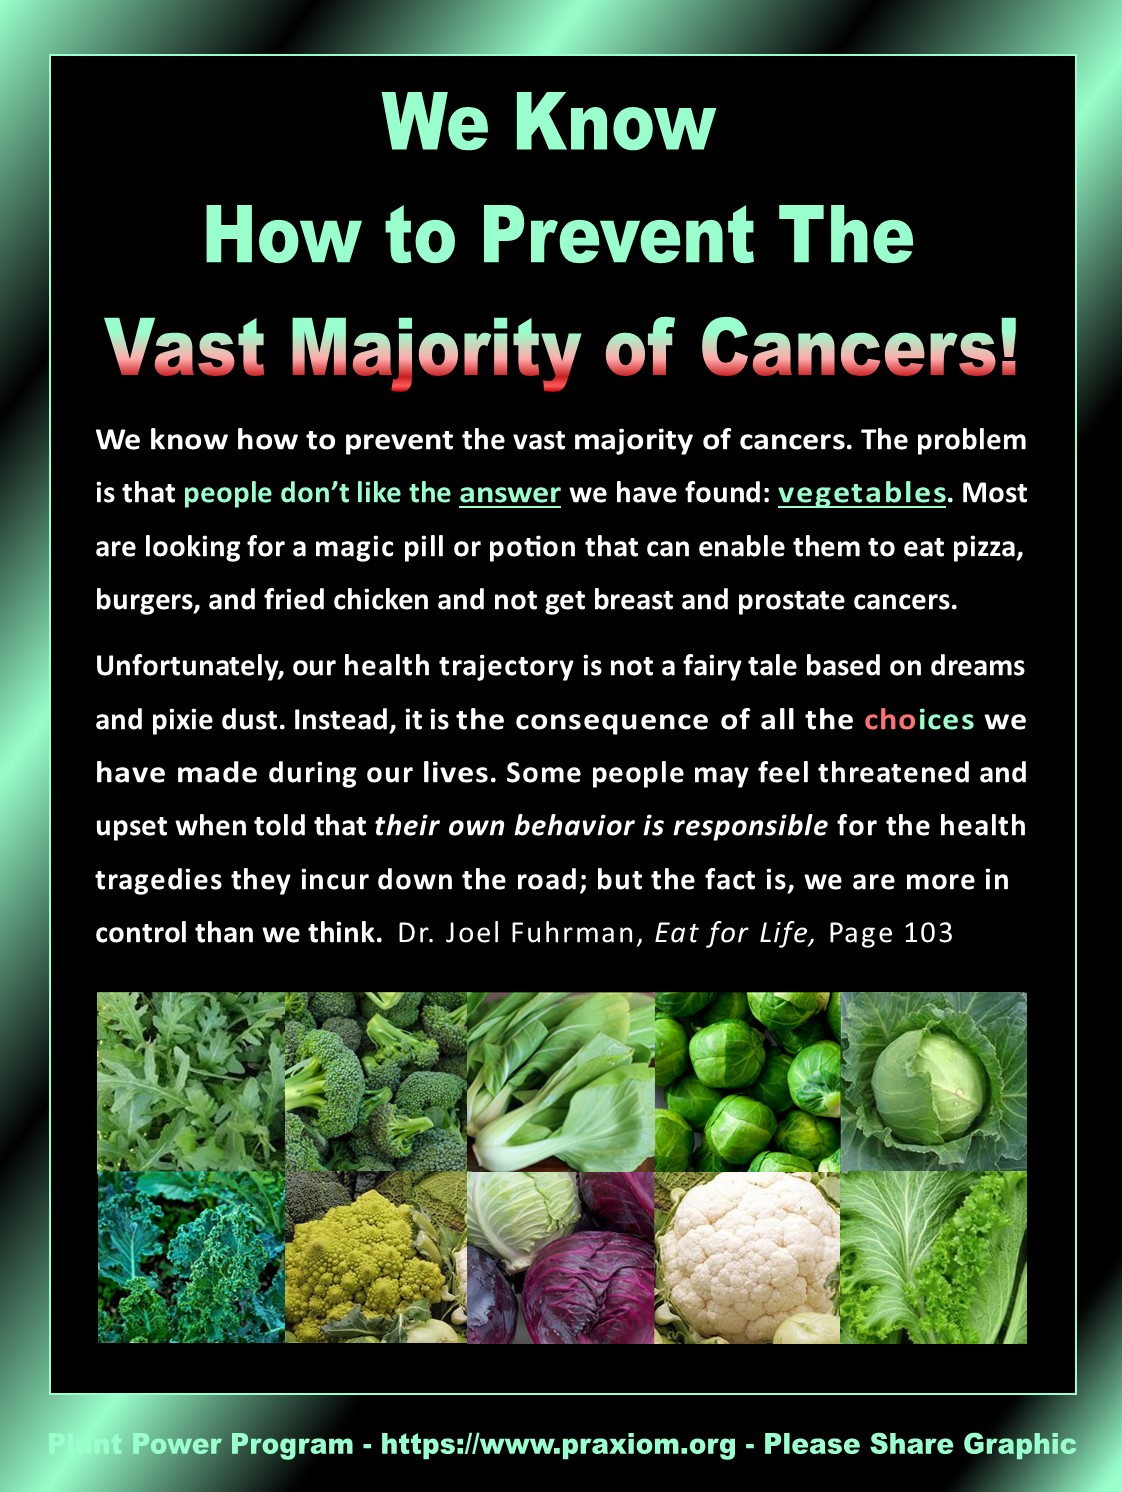 We know how to prevent the vast majority of cancers